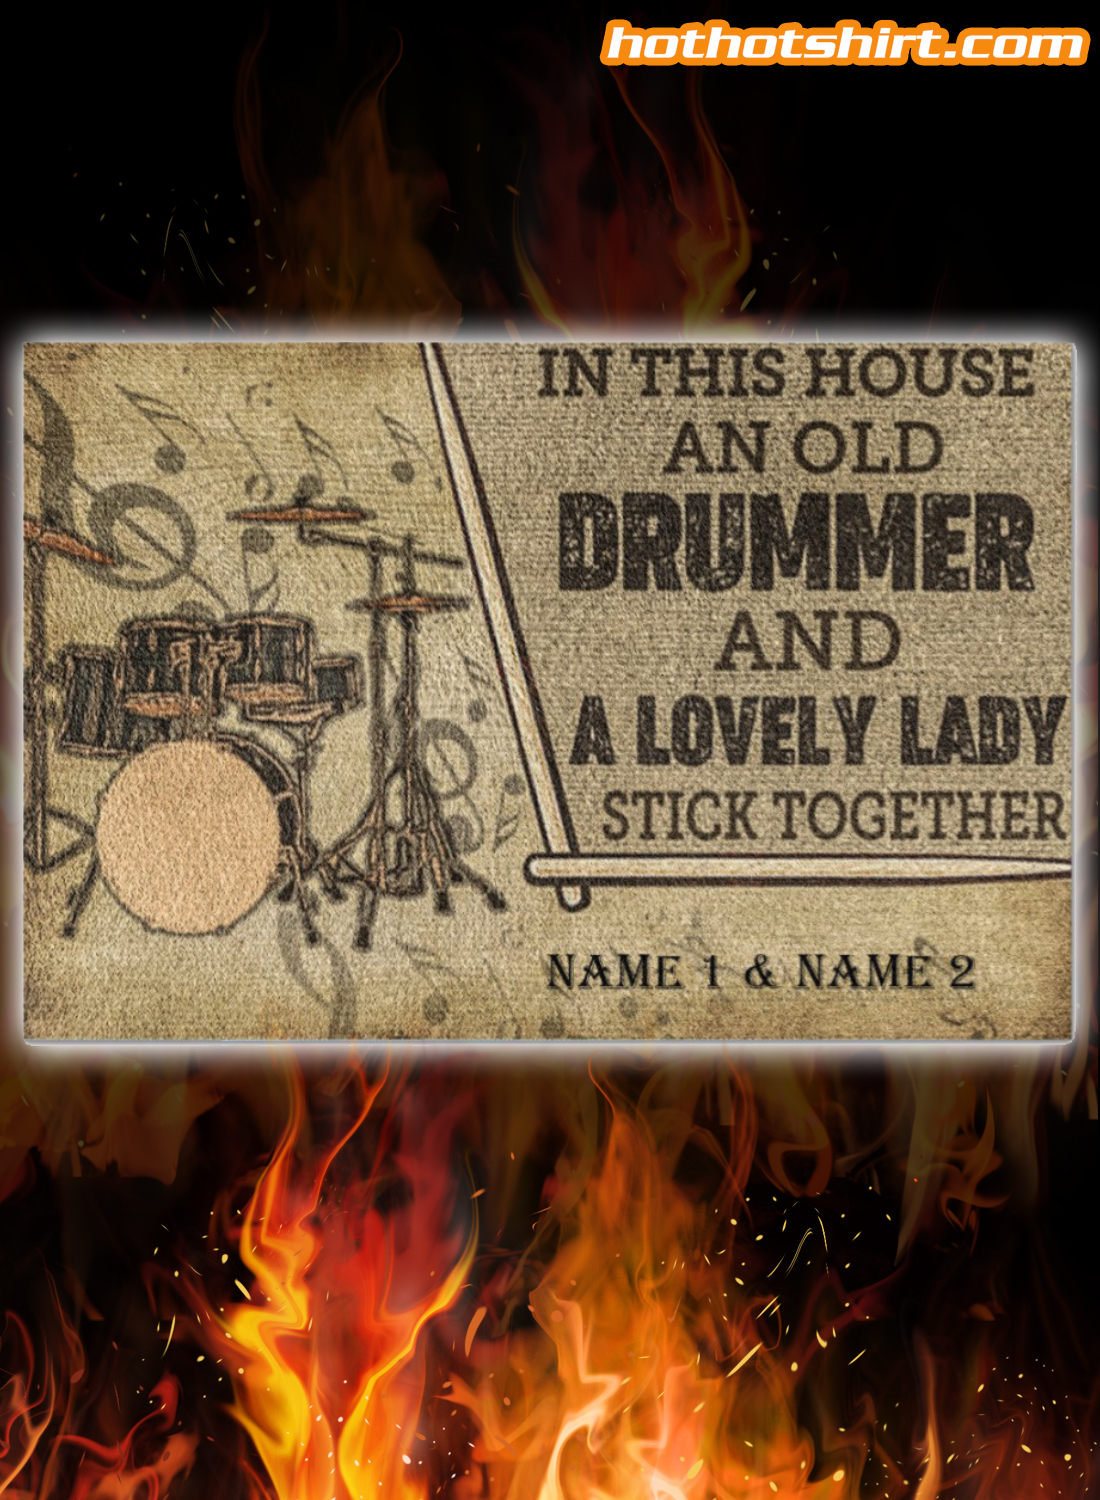 Drummer and a lovely lady stick together personalized doormat